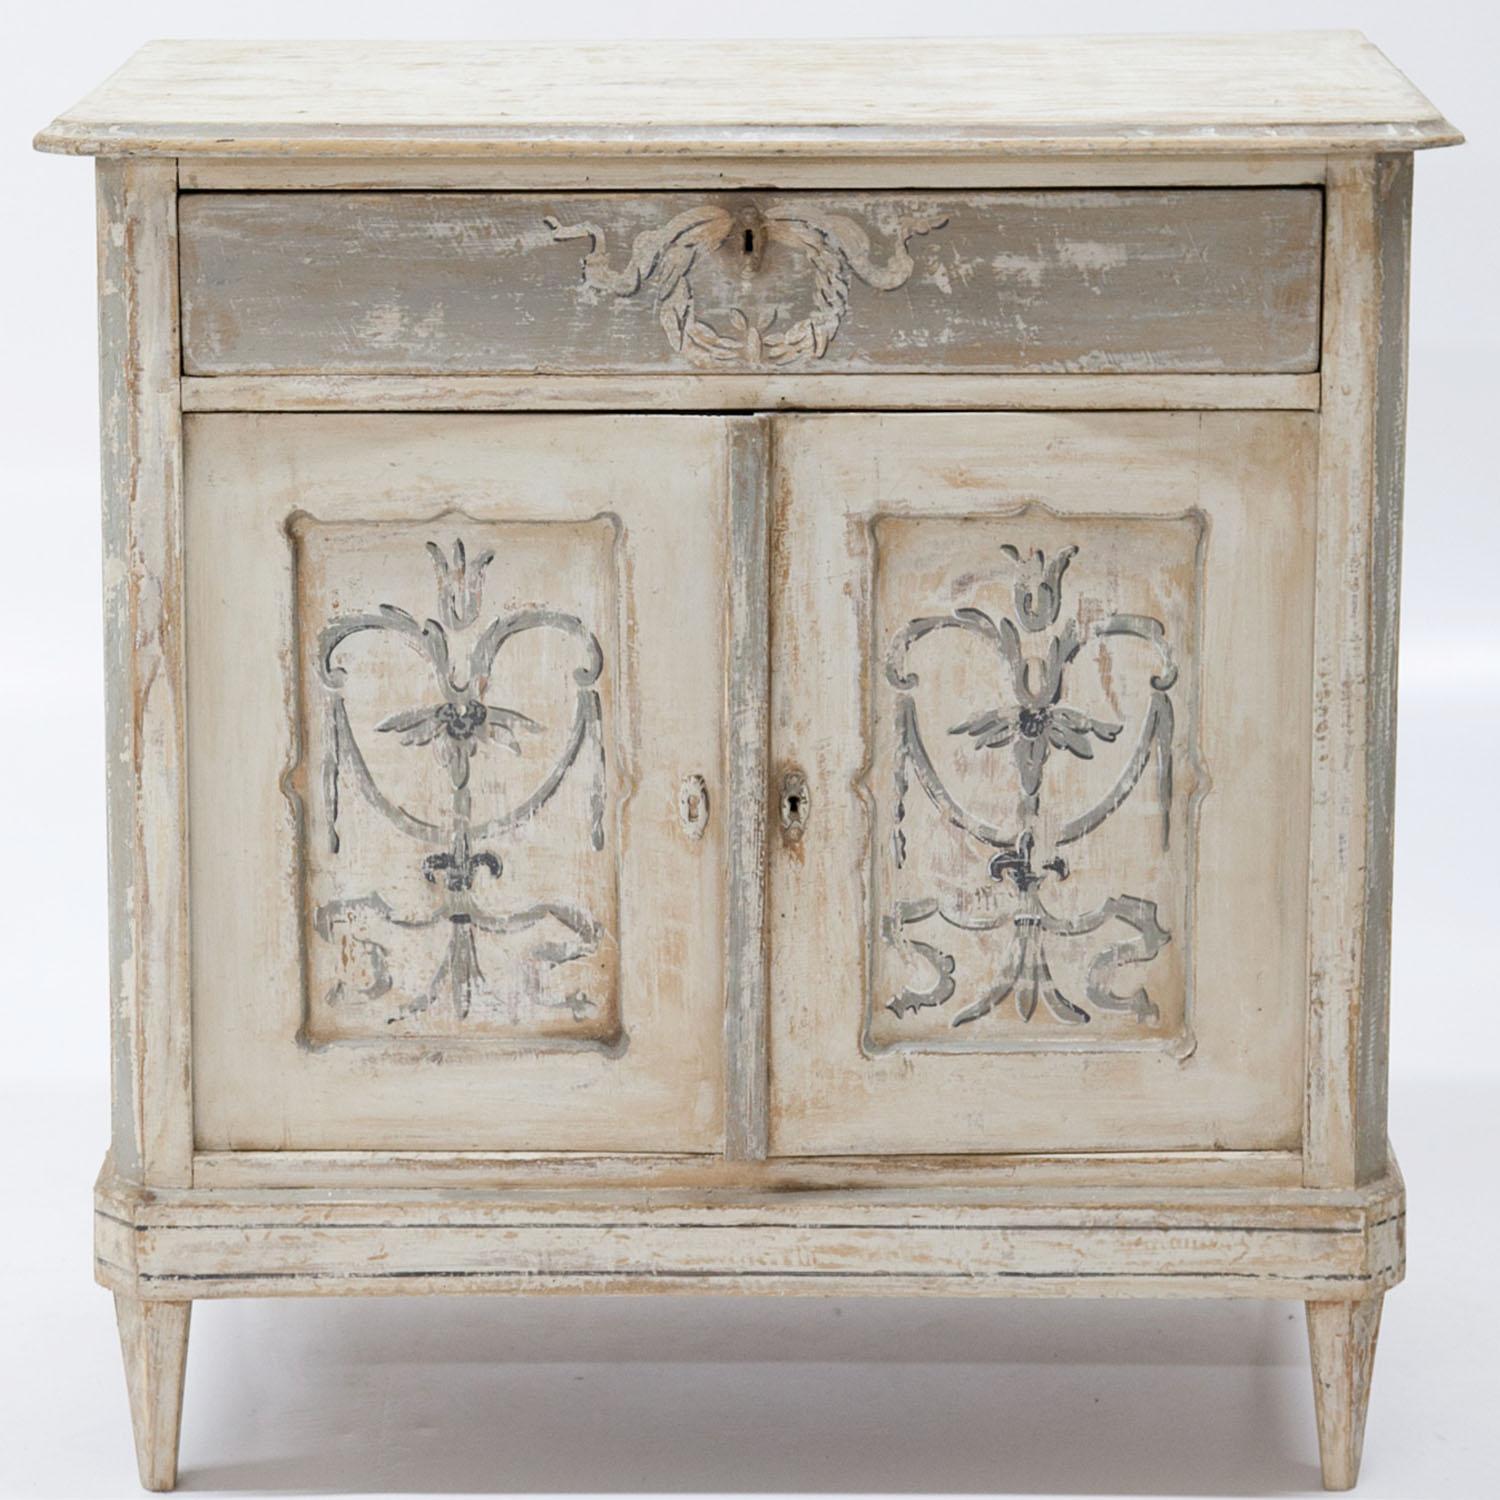 Biedermeier cabinet standing on tapered feet with two doors and one top drawer. The body with slanted corners and wavy fillings on the doors. The crème-white paint with grey decorative wreaths was redone and has a worn look to it.